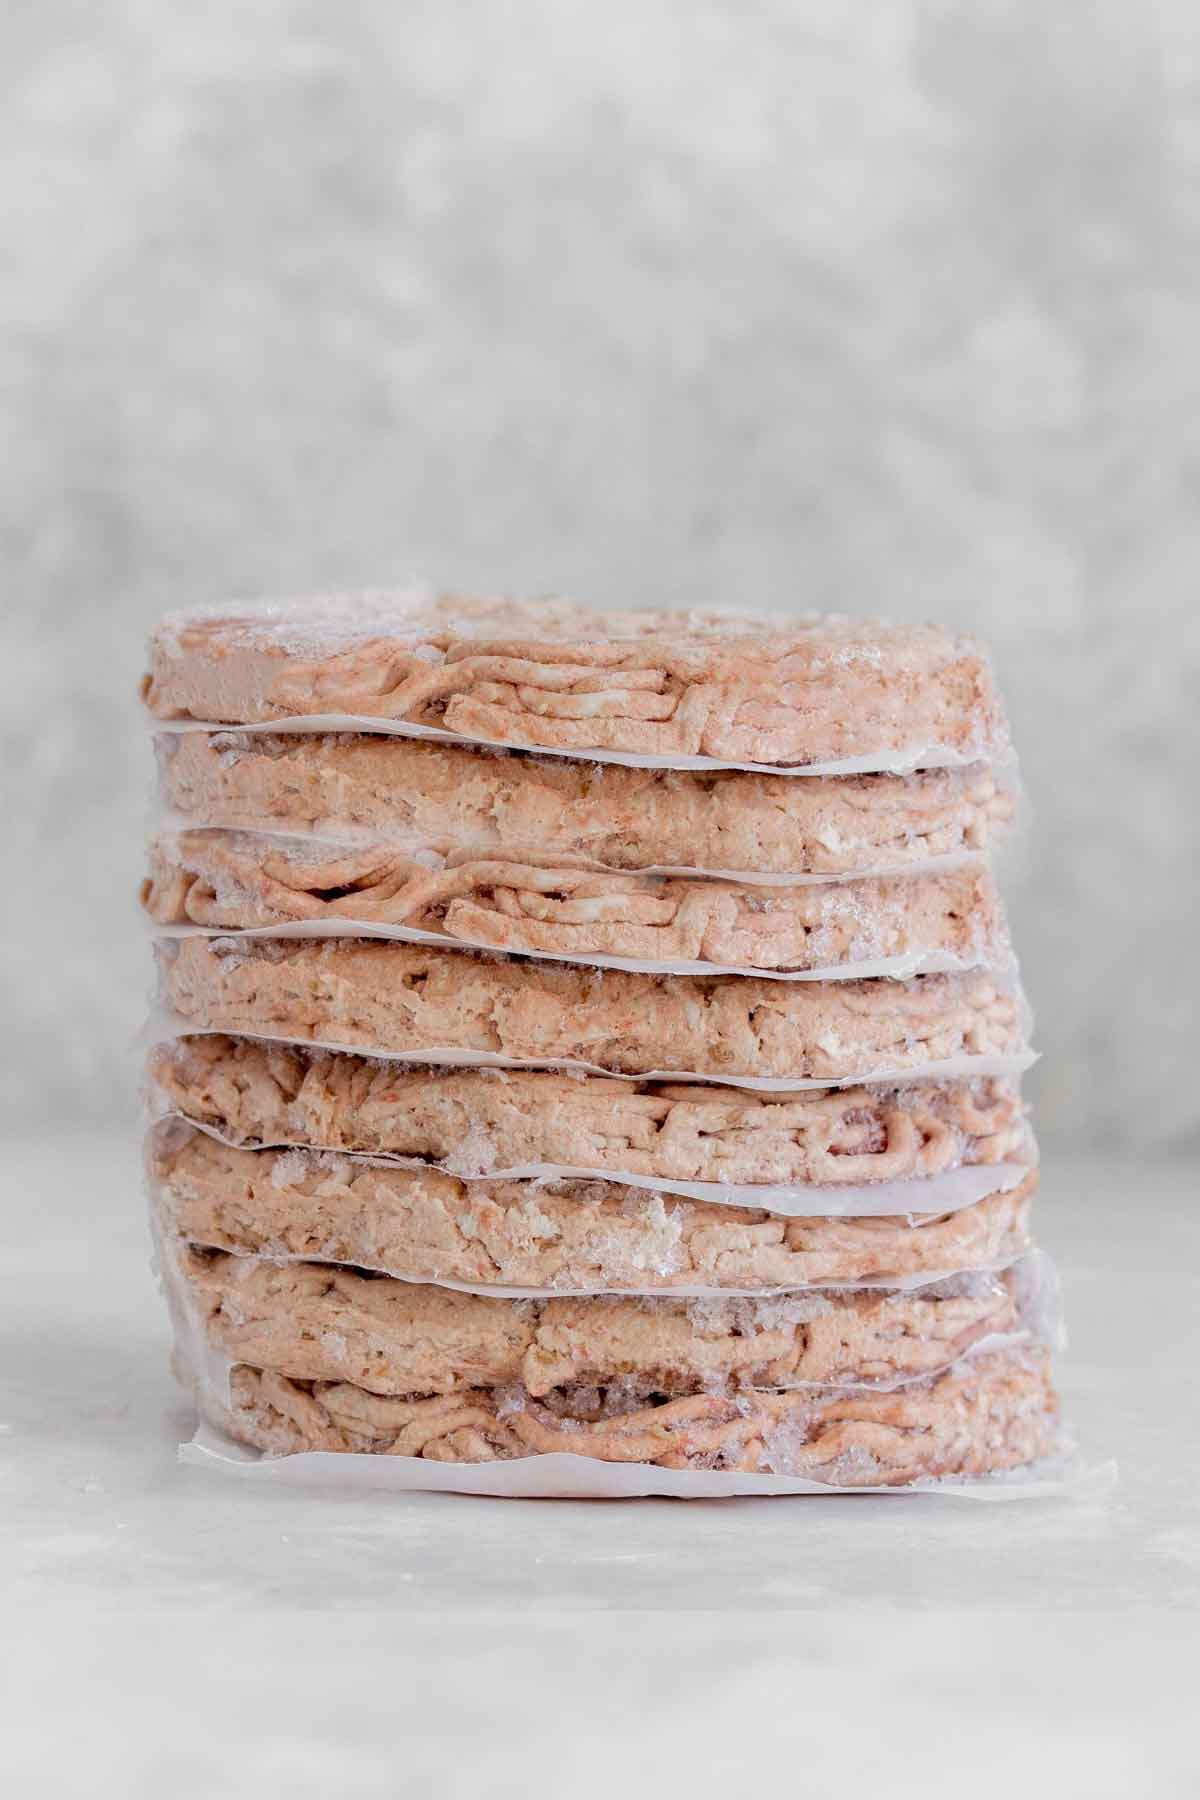 A stack of frozen burger patties.